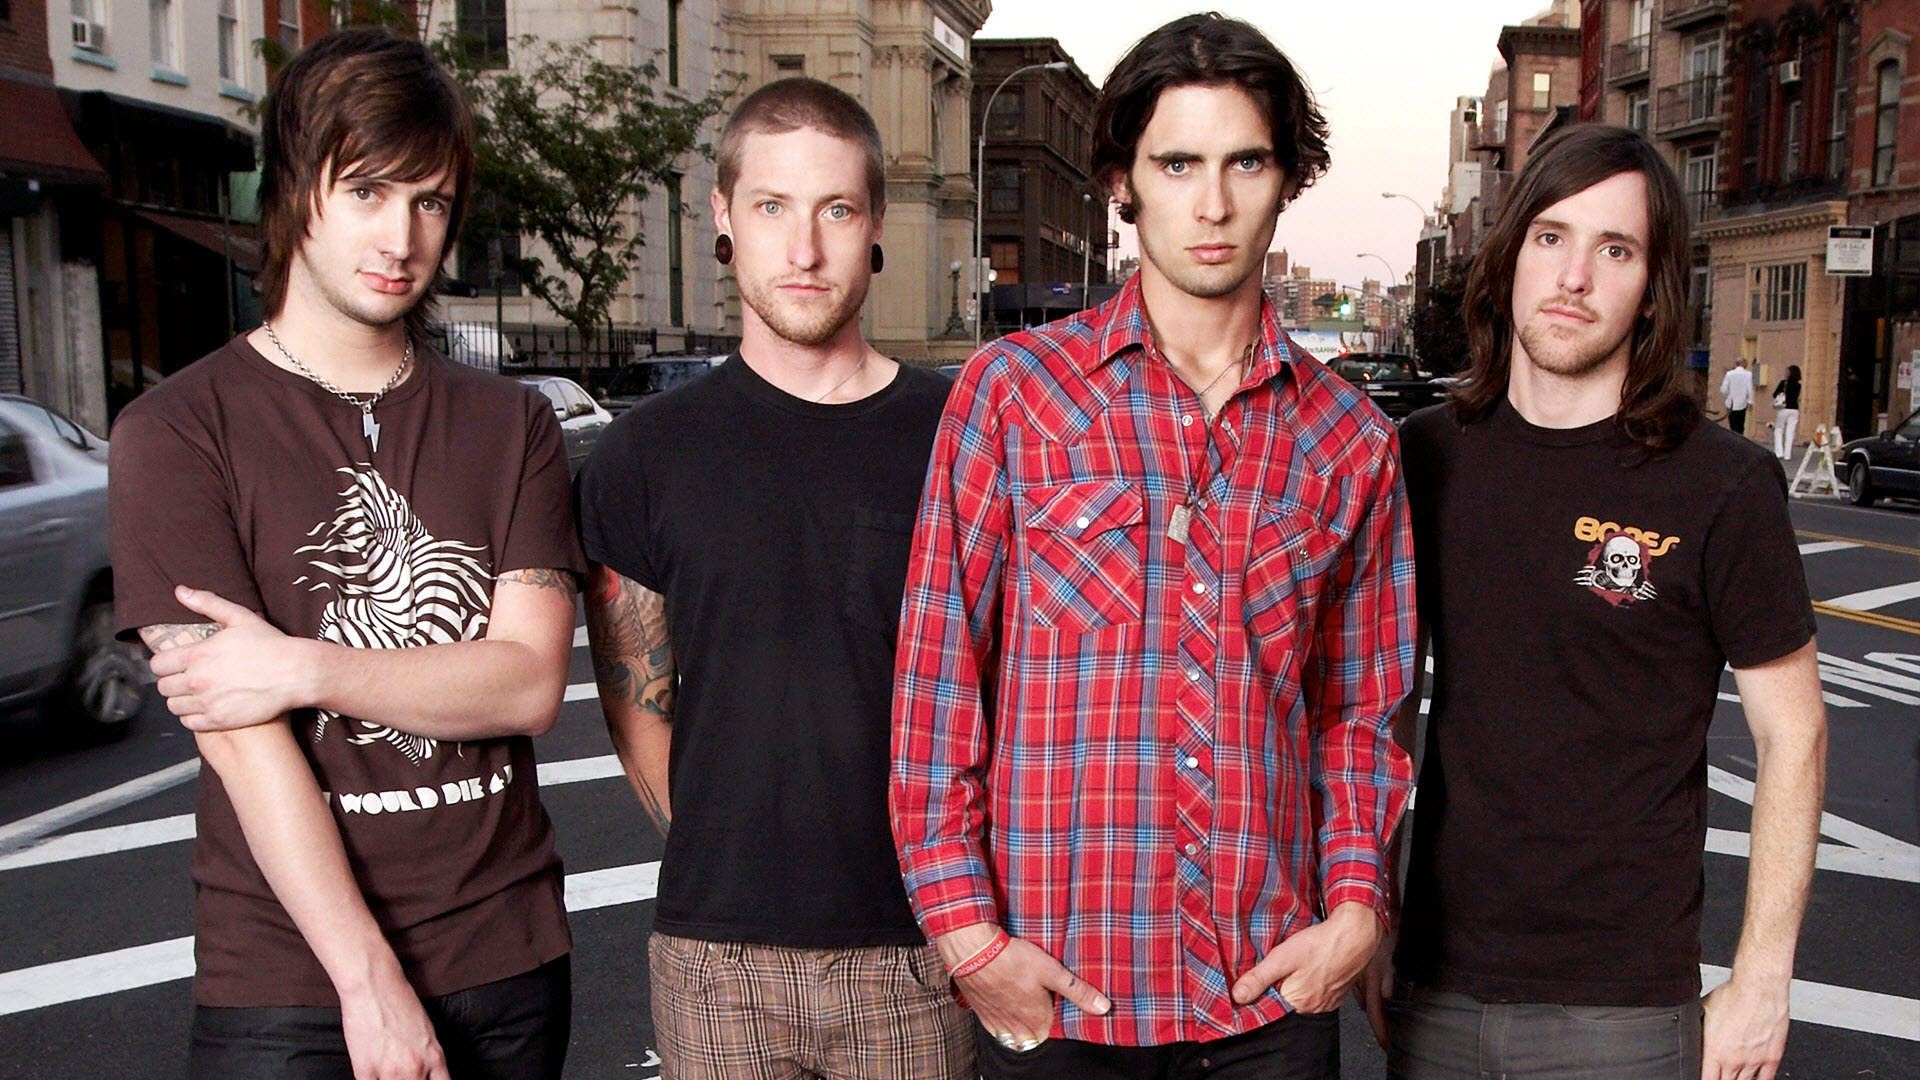 Walk Over Me av The All American Rejects